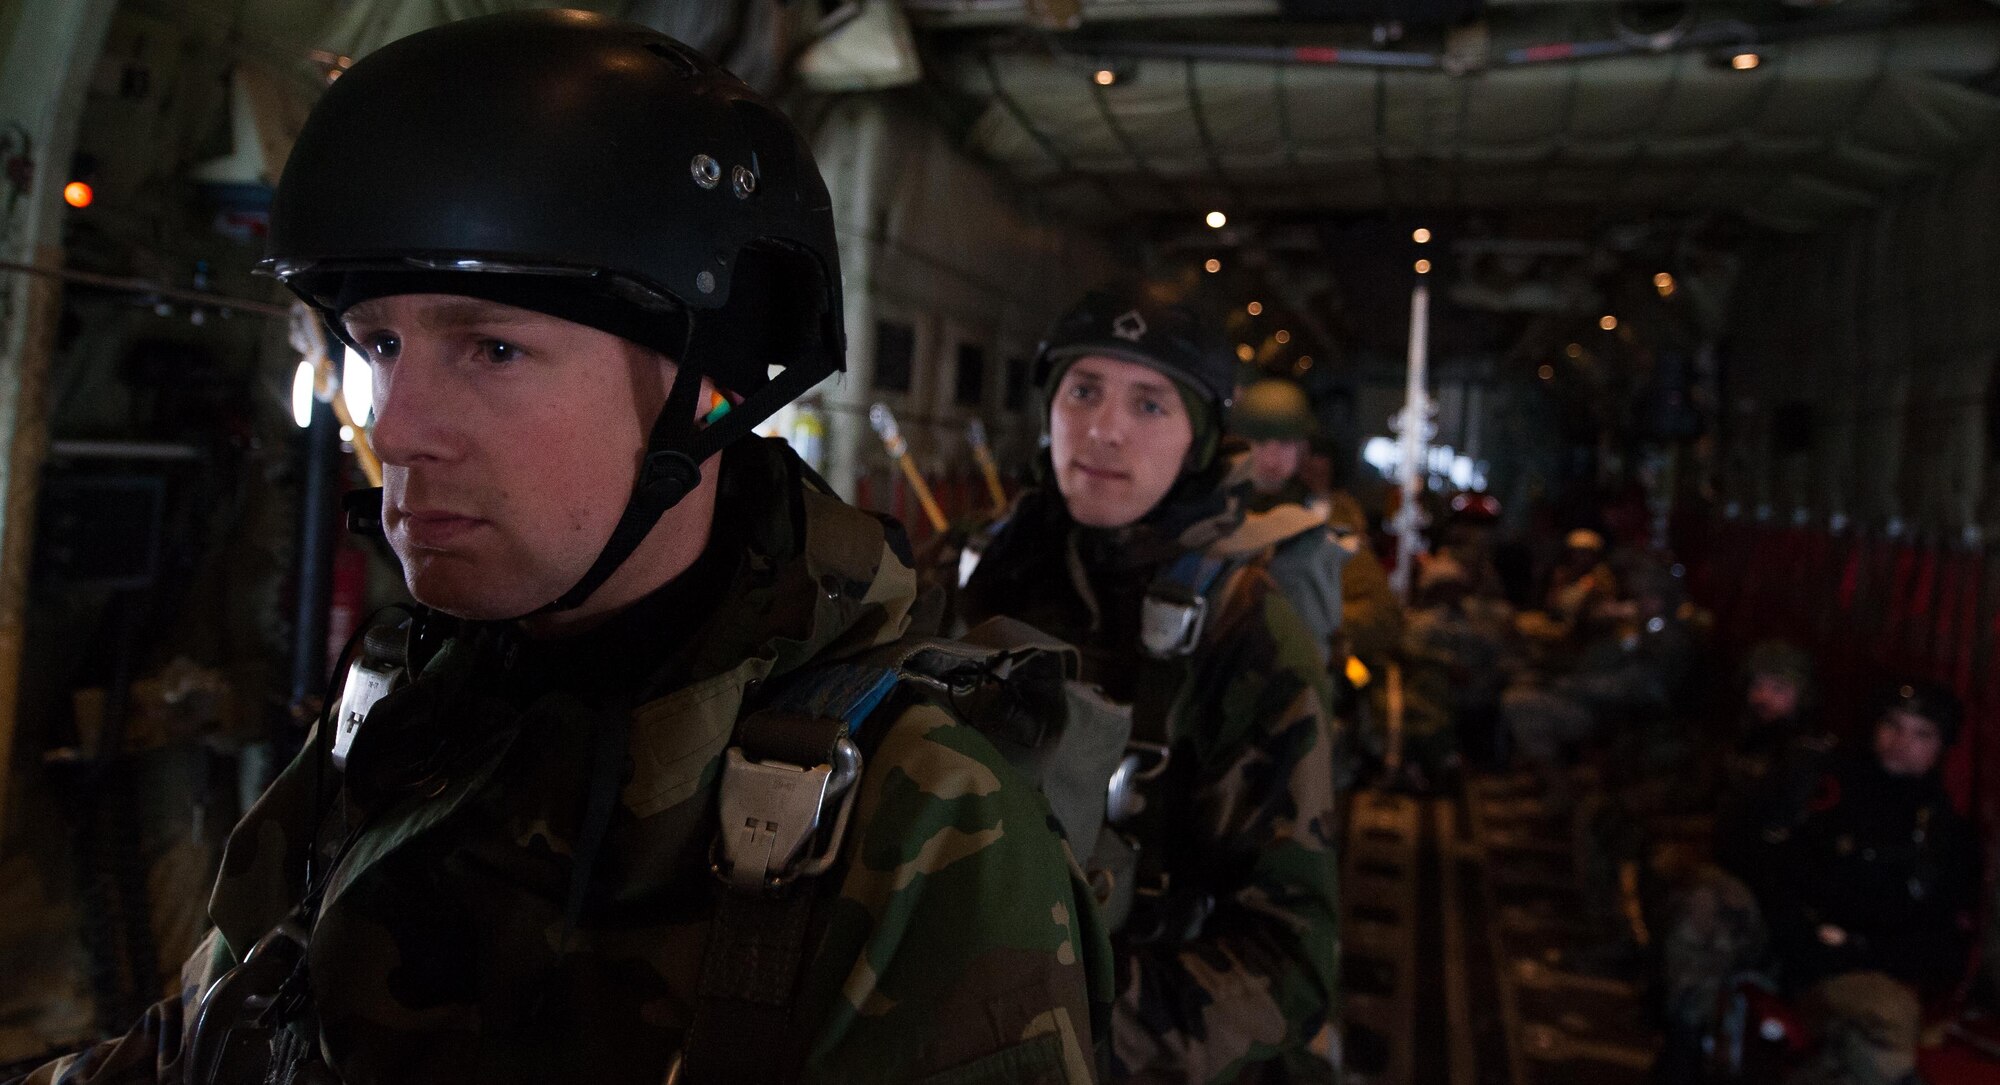 NATO allied nation paratroopers stand by on a C-130J Super Hercules before they jump during an International Jump Week exercise over Germany Dec. 1, 2016. The most recent iteration of the exercise occurred Nov. 28-Dec. 2, and crews from Ramstein’s 37th Airlift Squadron assisted in the paratroopers’ mission by flying them to their drop zone. (U.S. Air Force photo by Airman 1st Class Lane T. Plummer)